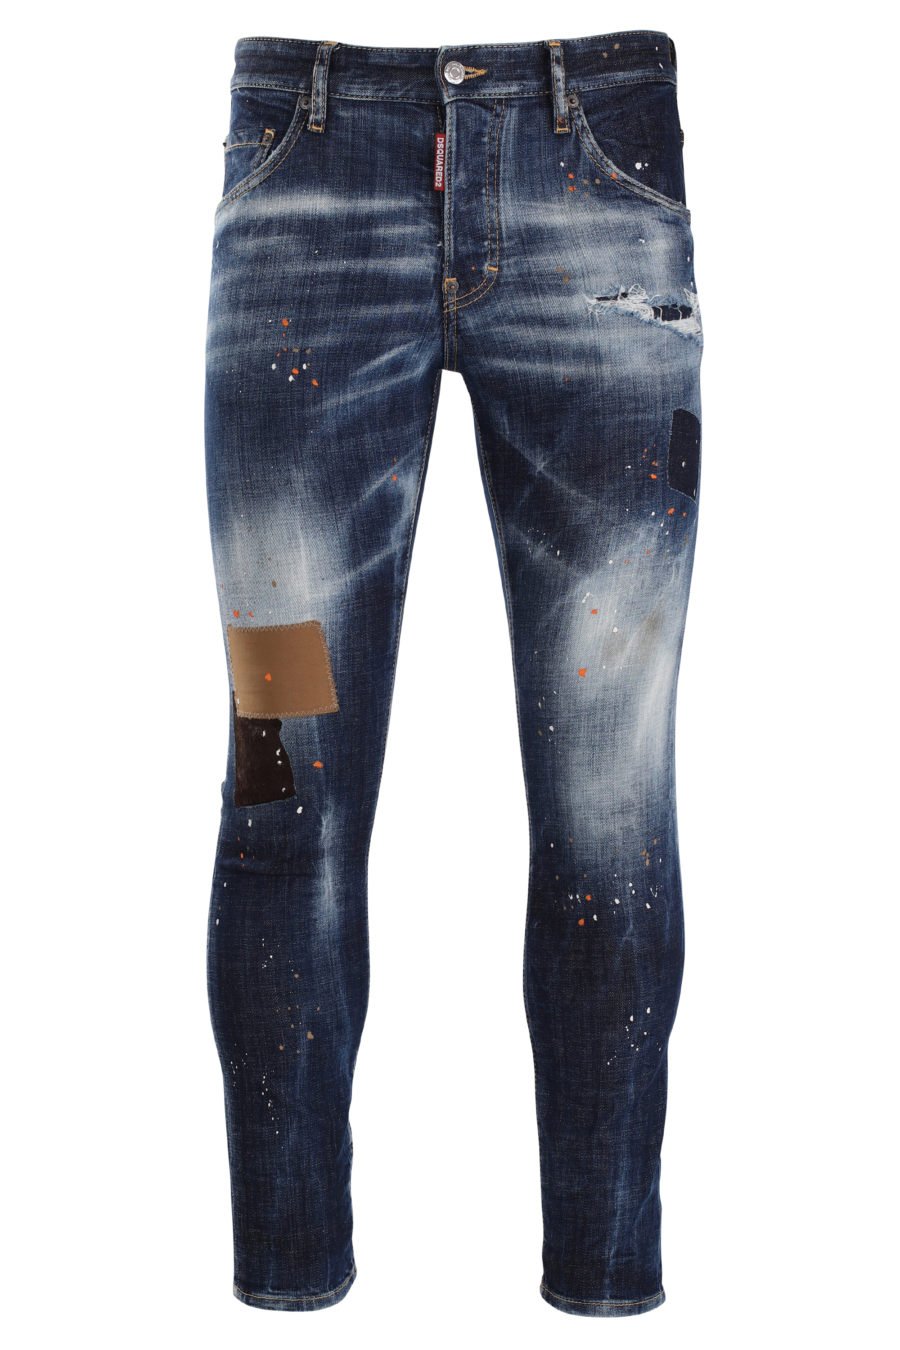 Worn blue skater jeans with brown patches - IMG 0008